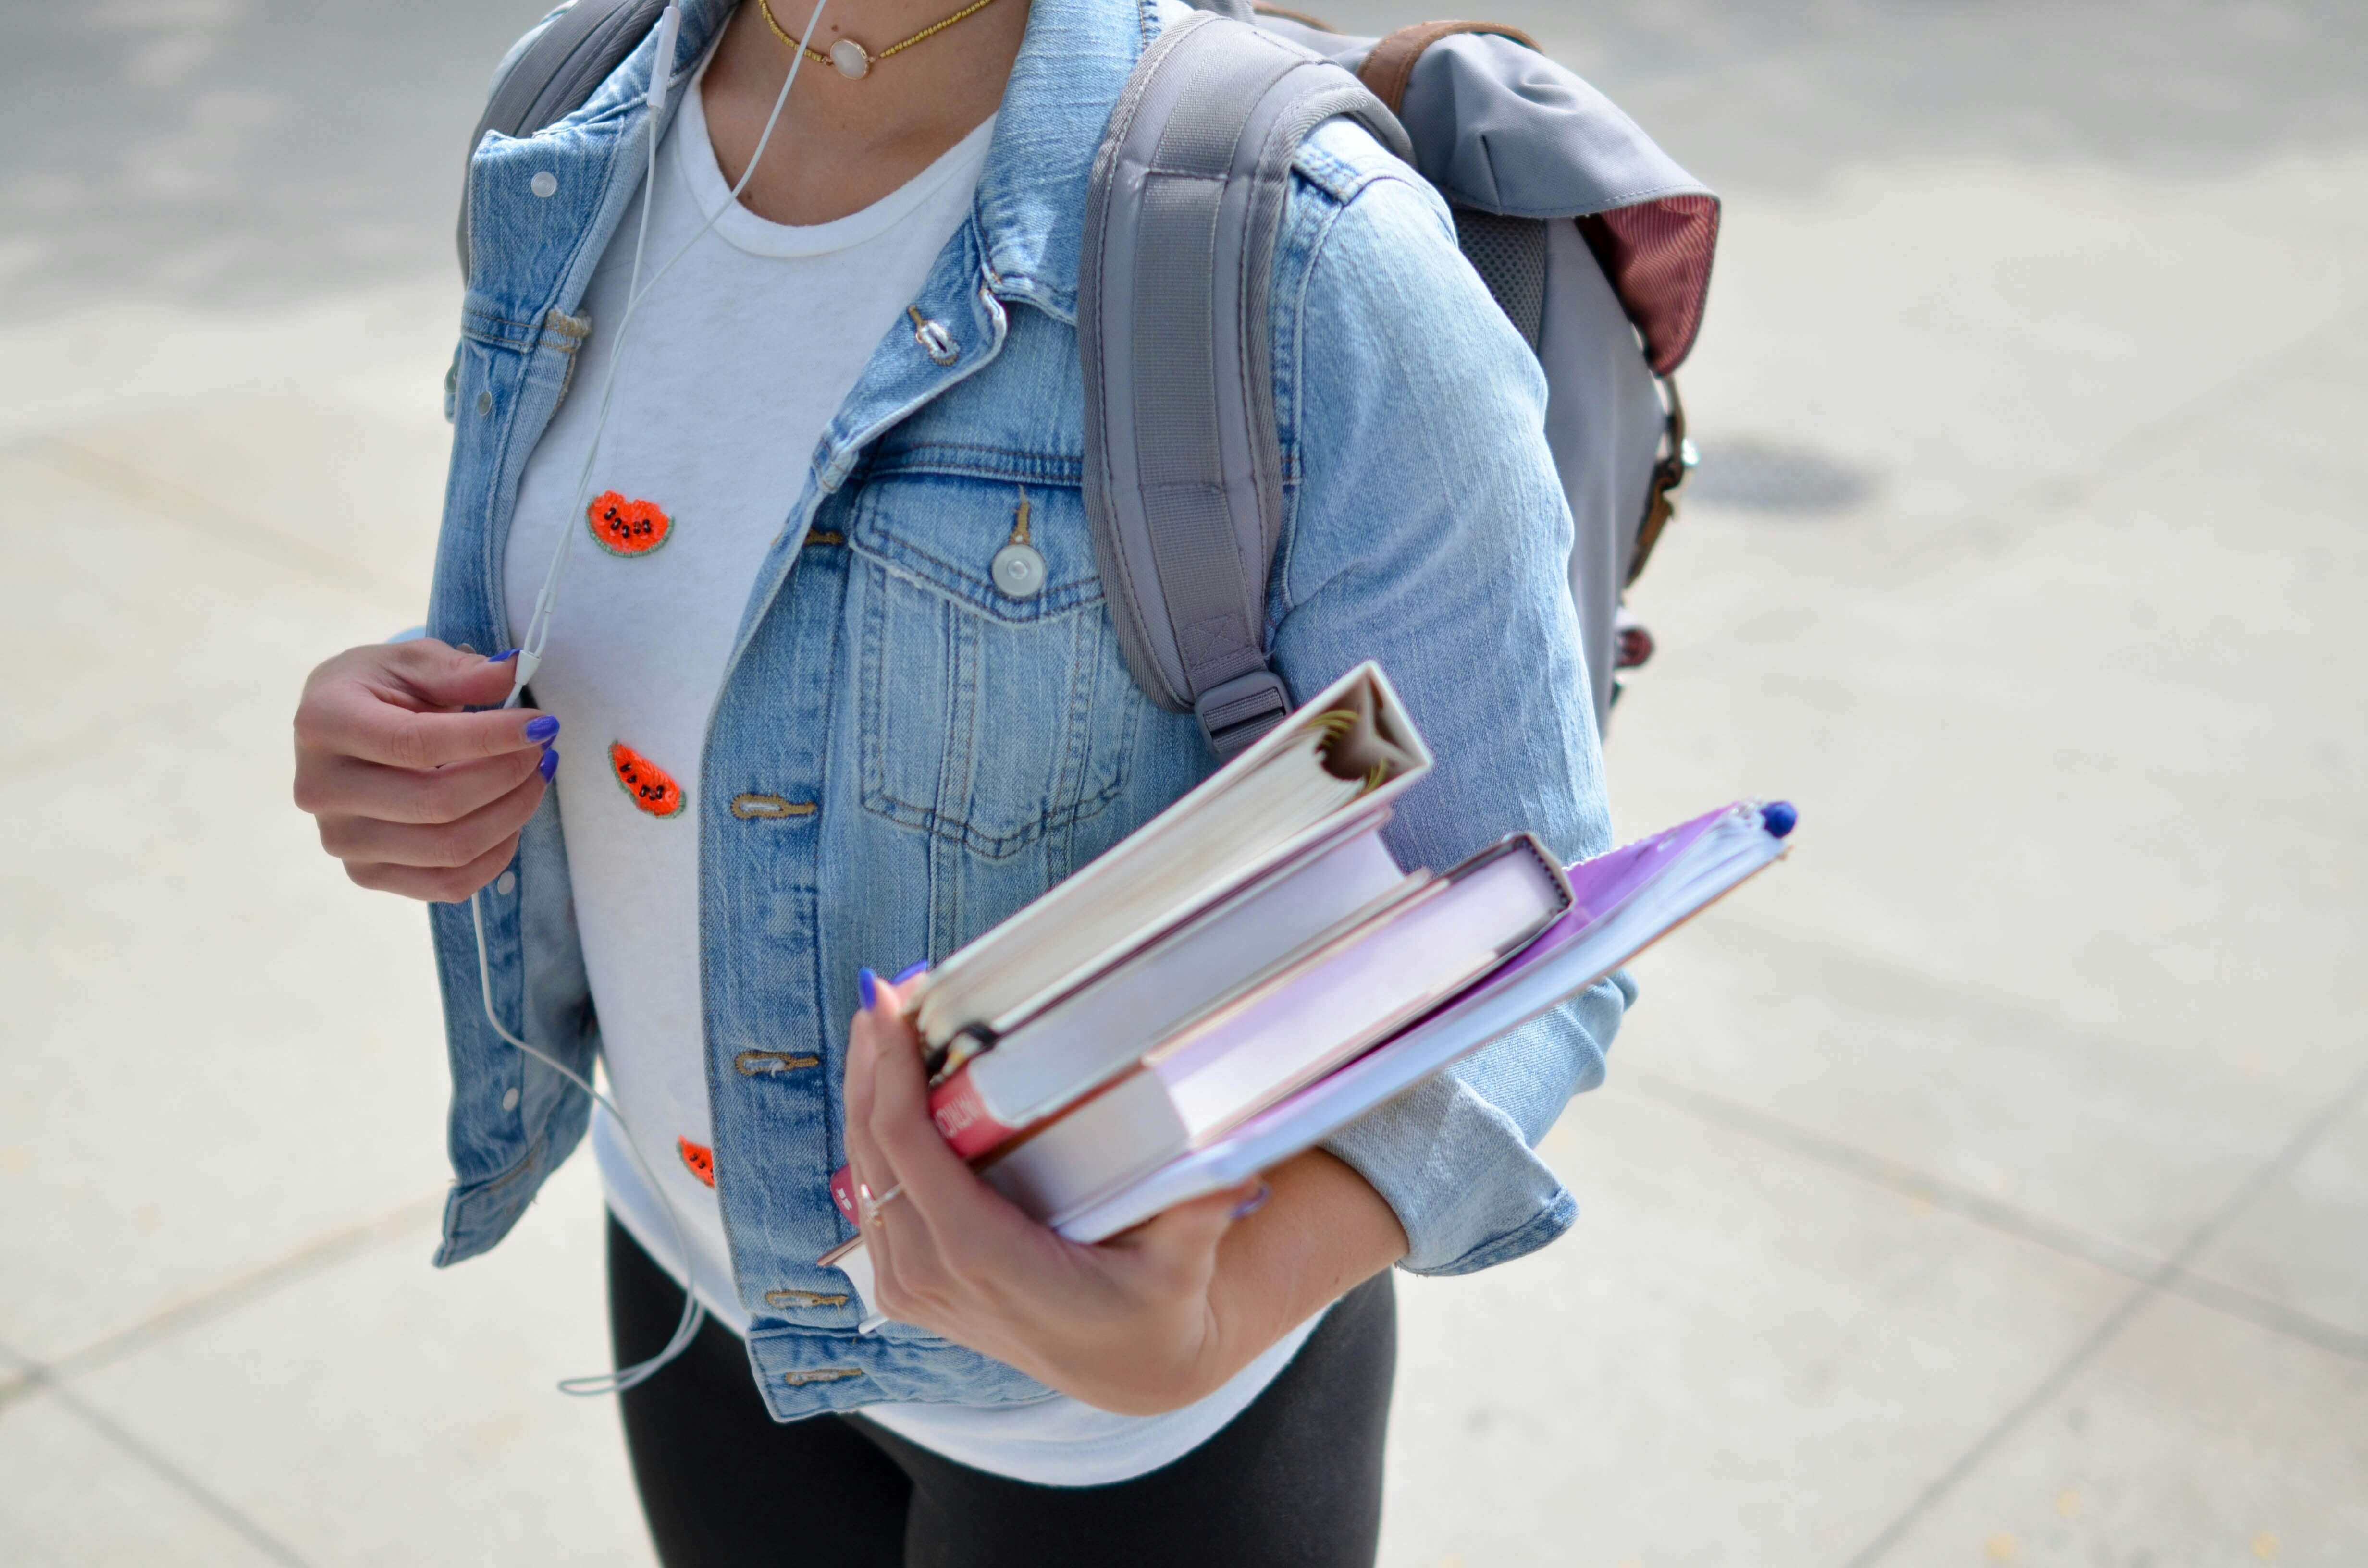 Top 10 Ways College-Bound Students Should Prep Over the Summer